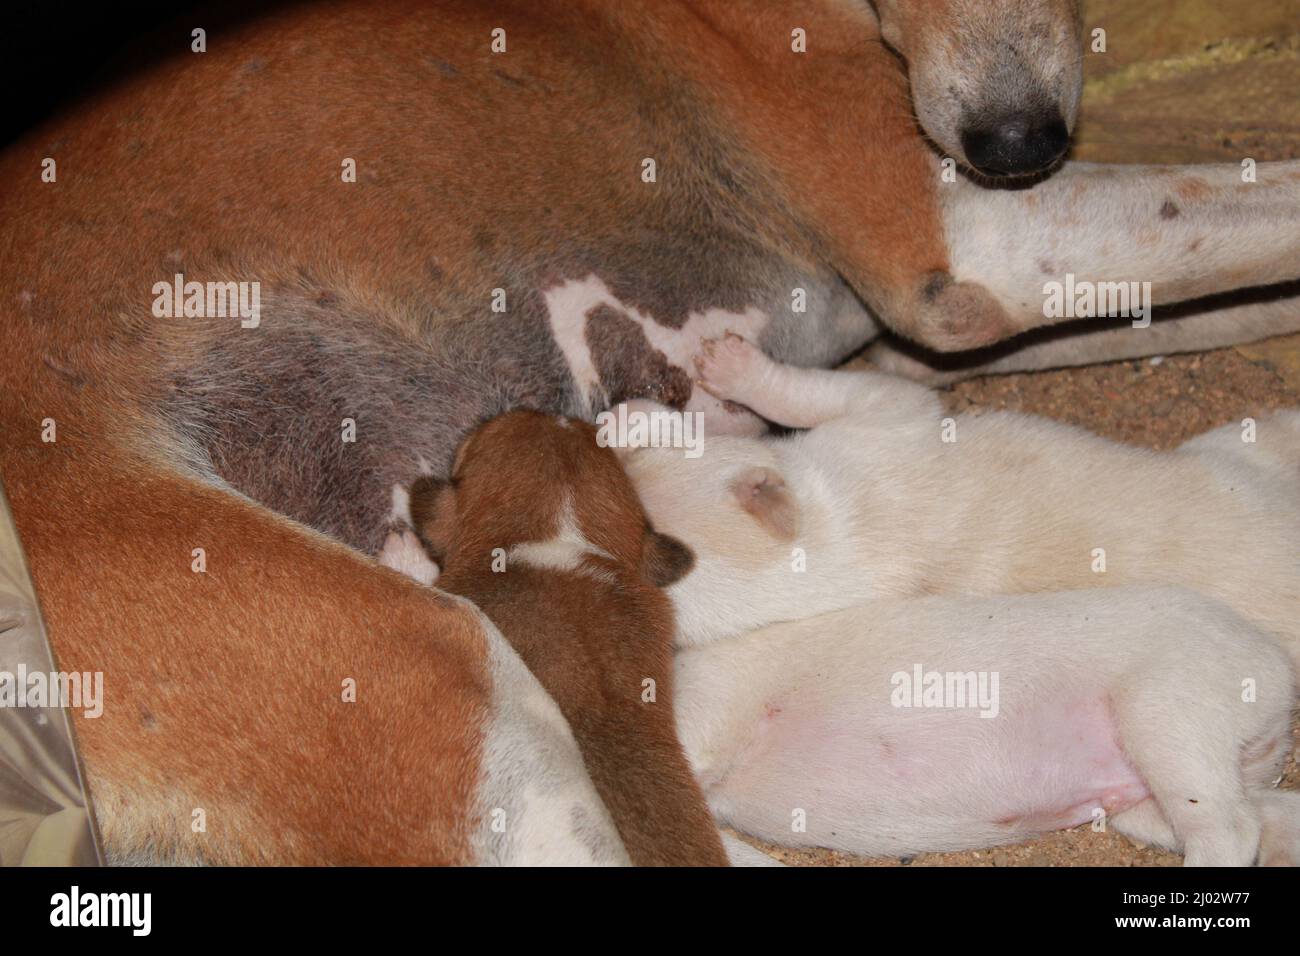 Puppies drinking milk from their mother. Stock Photo